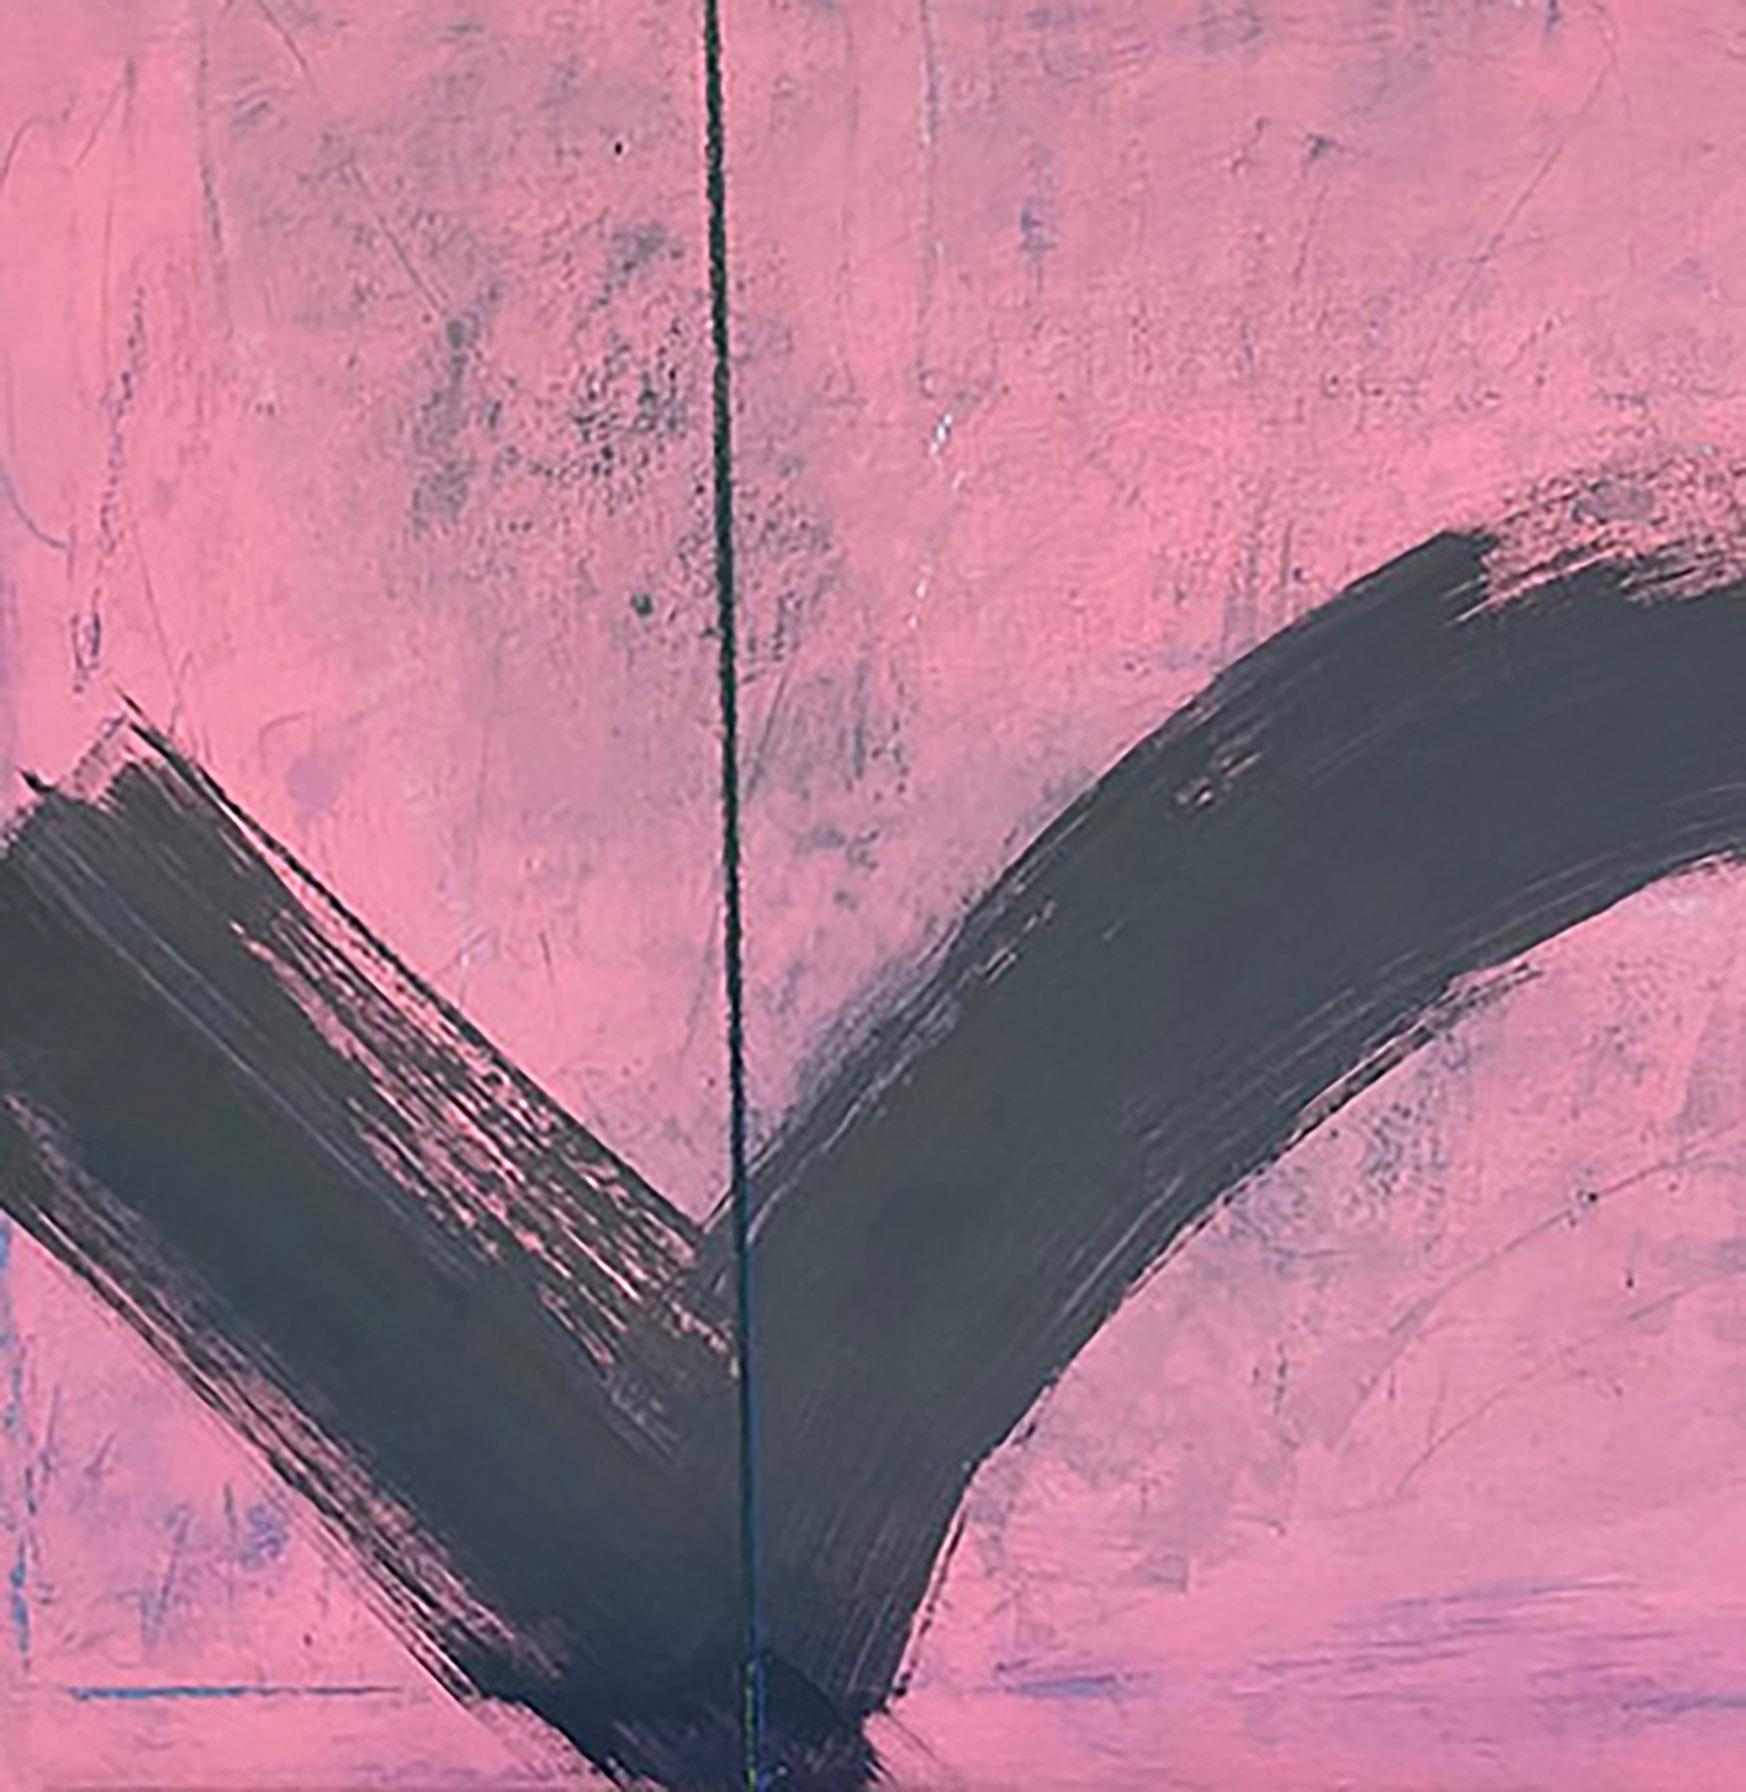 Raise The Bar #1, pink, black, patterned, yellow, script, blue - Painting by Ted Dixon